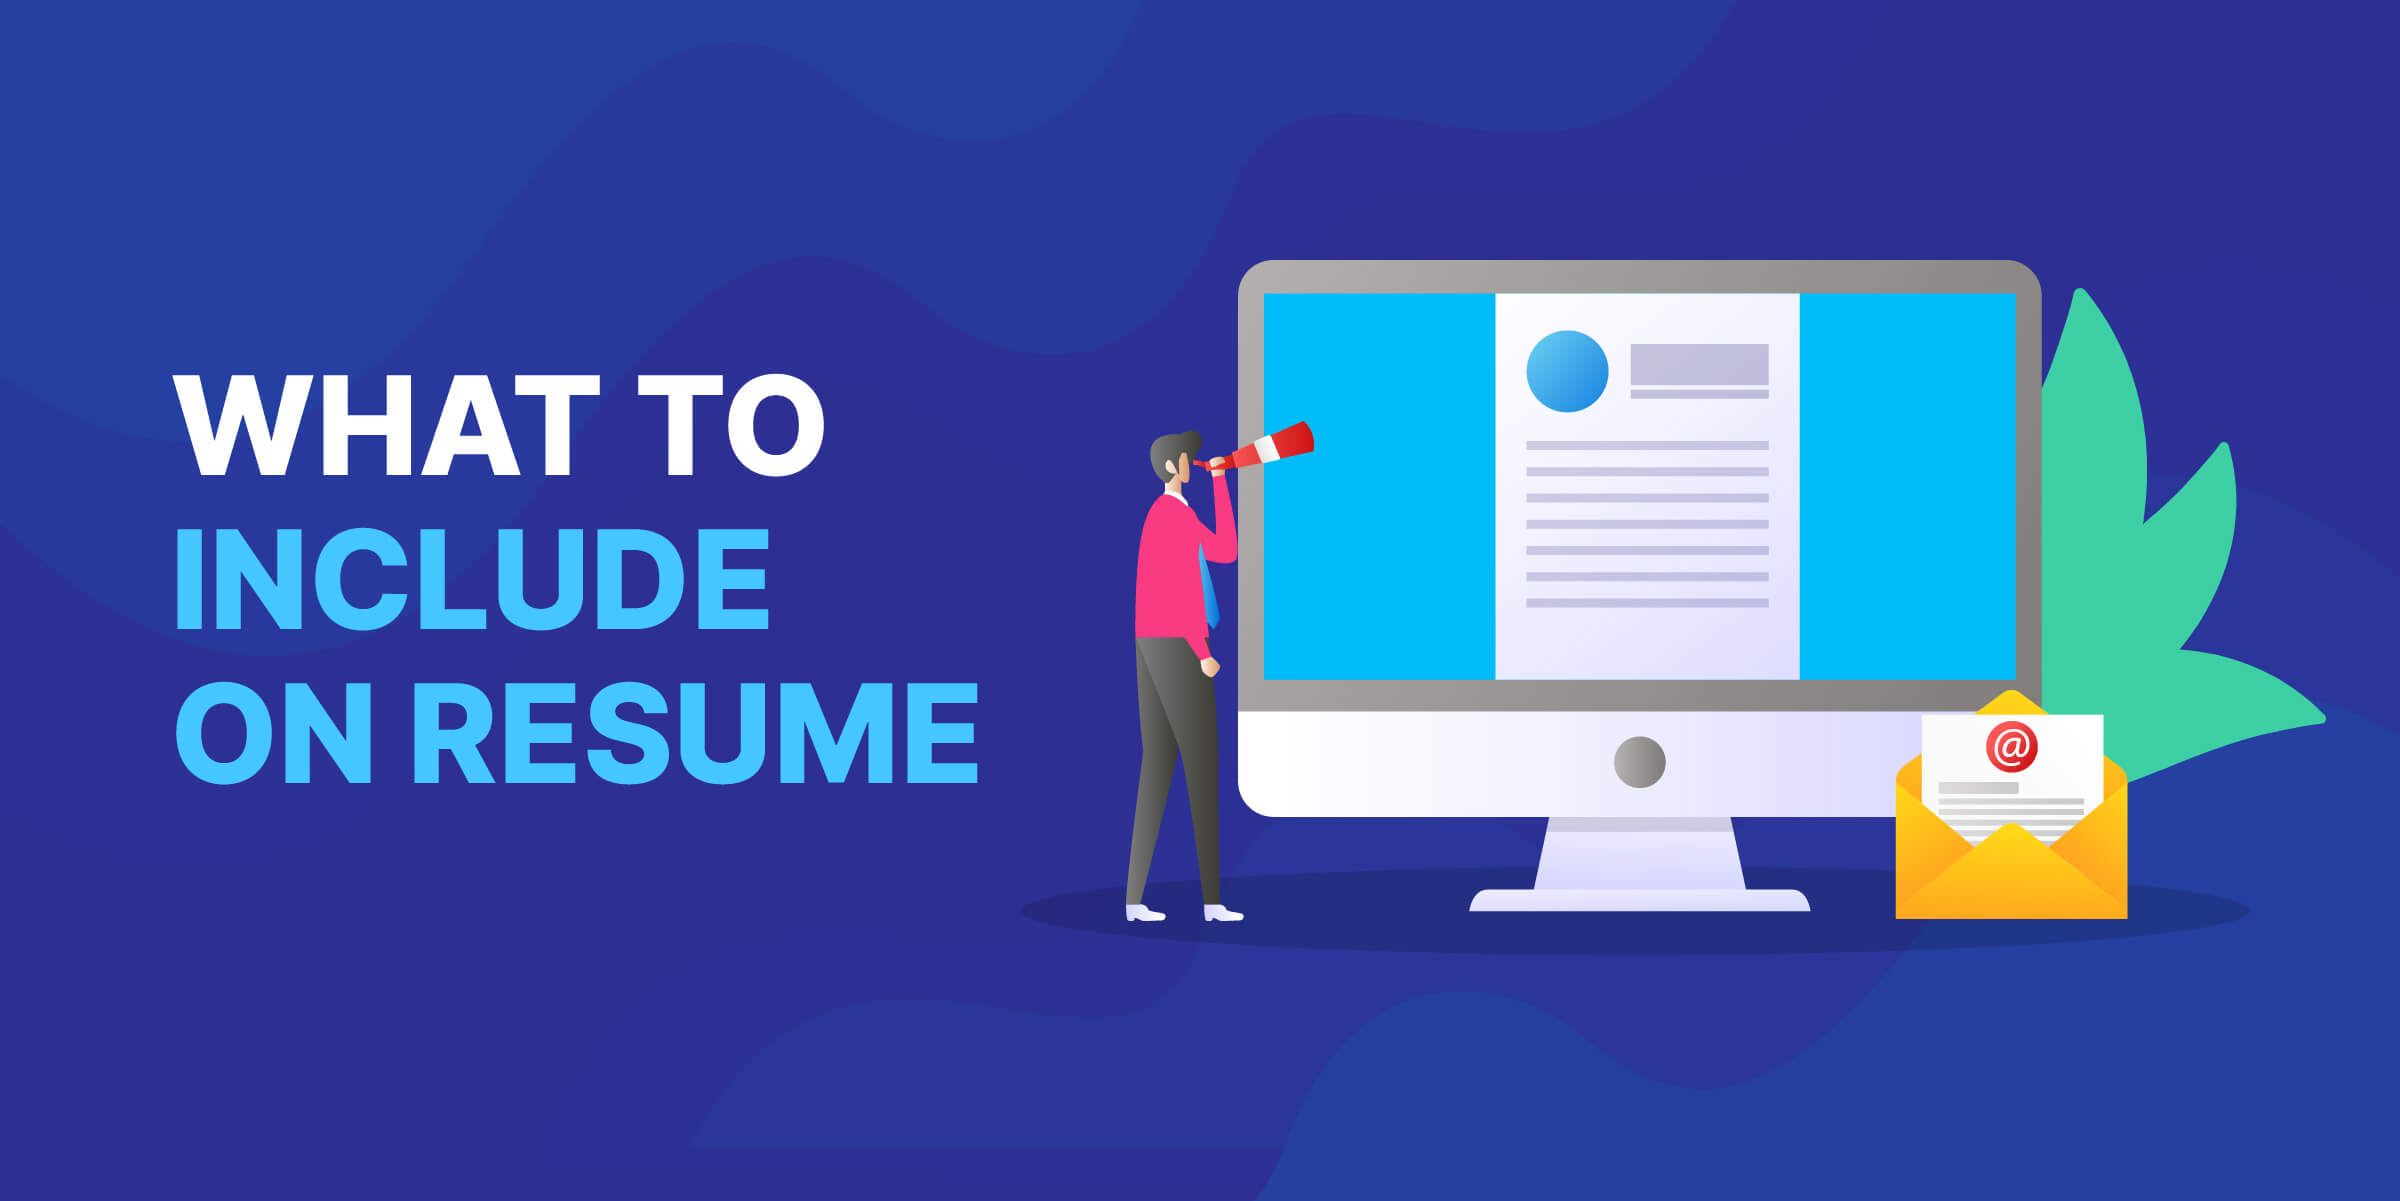 What to Include on Resume Email Marketer